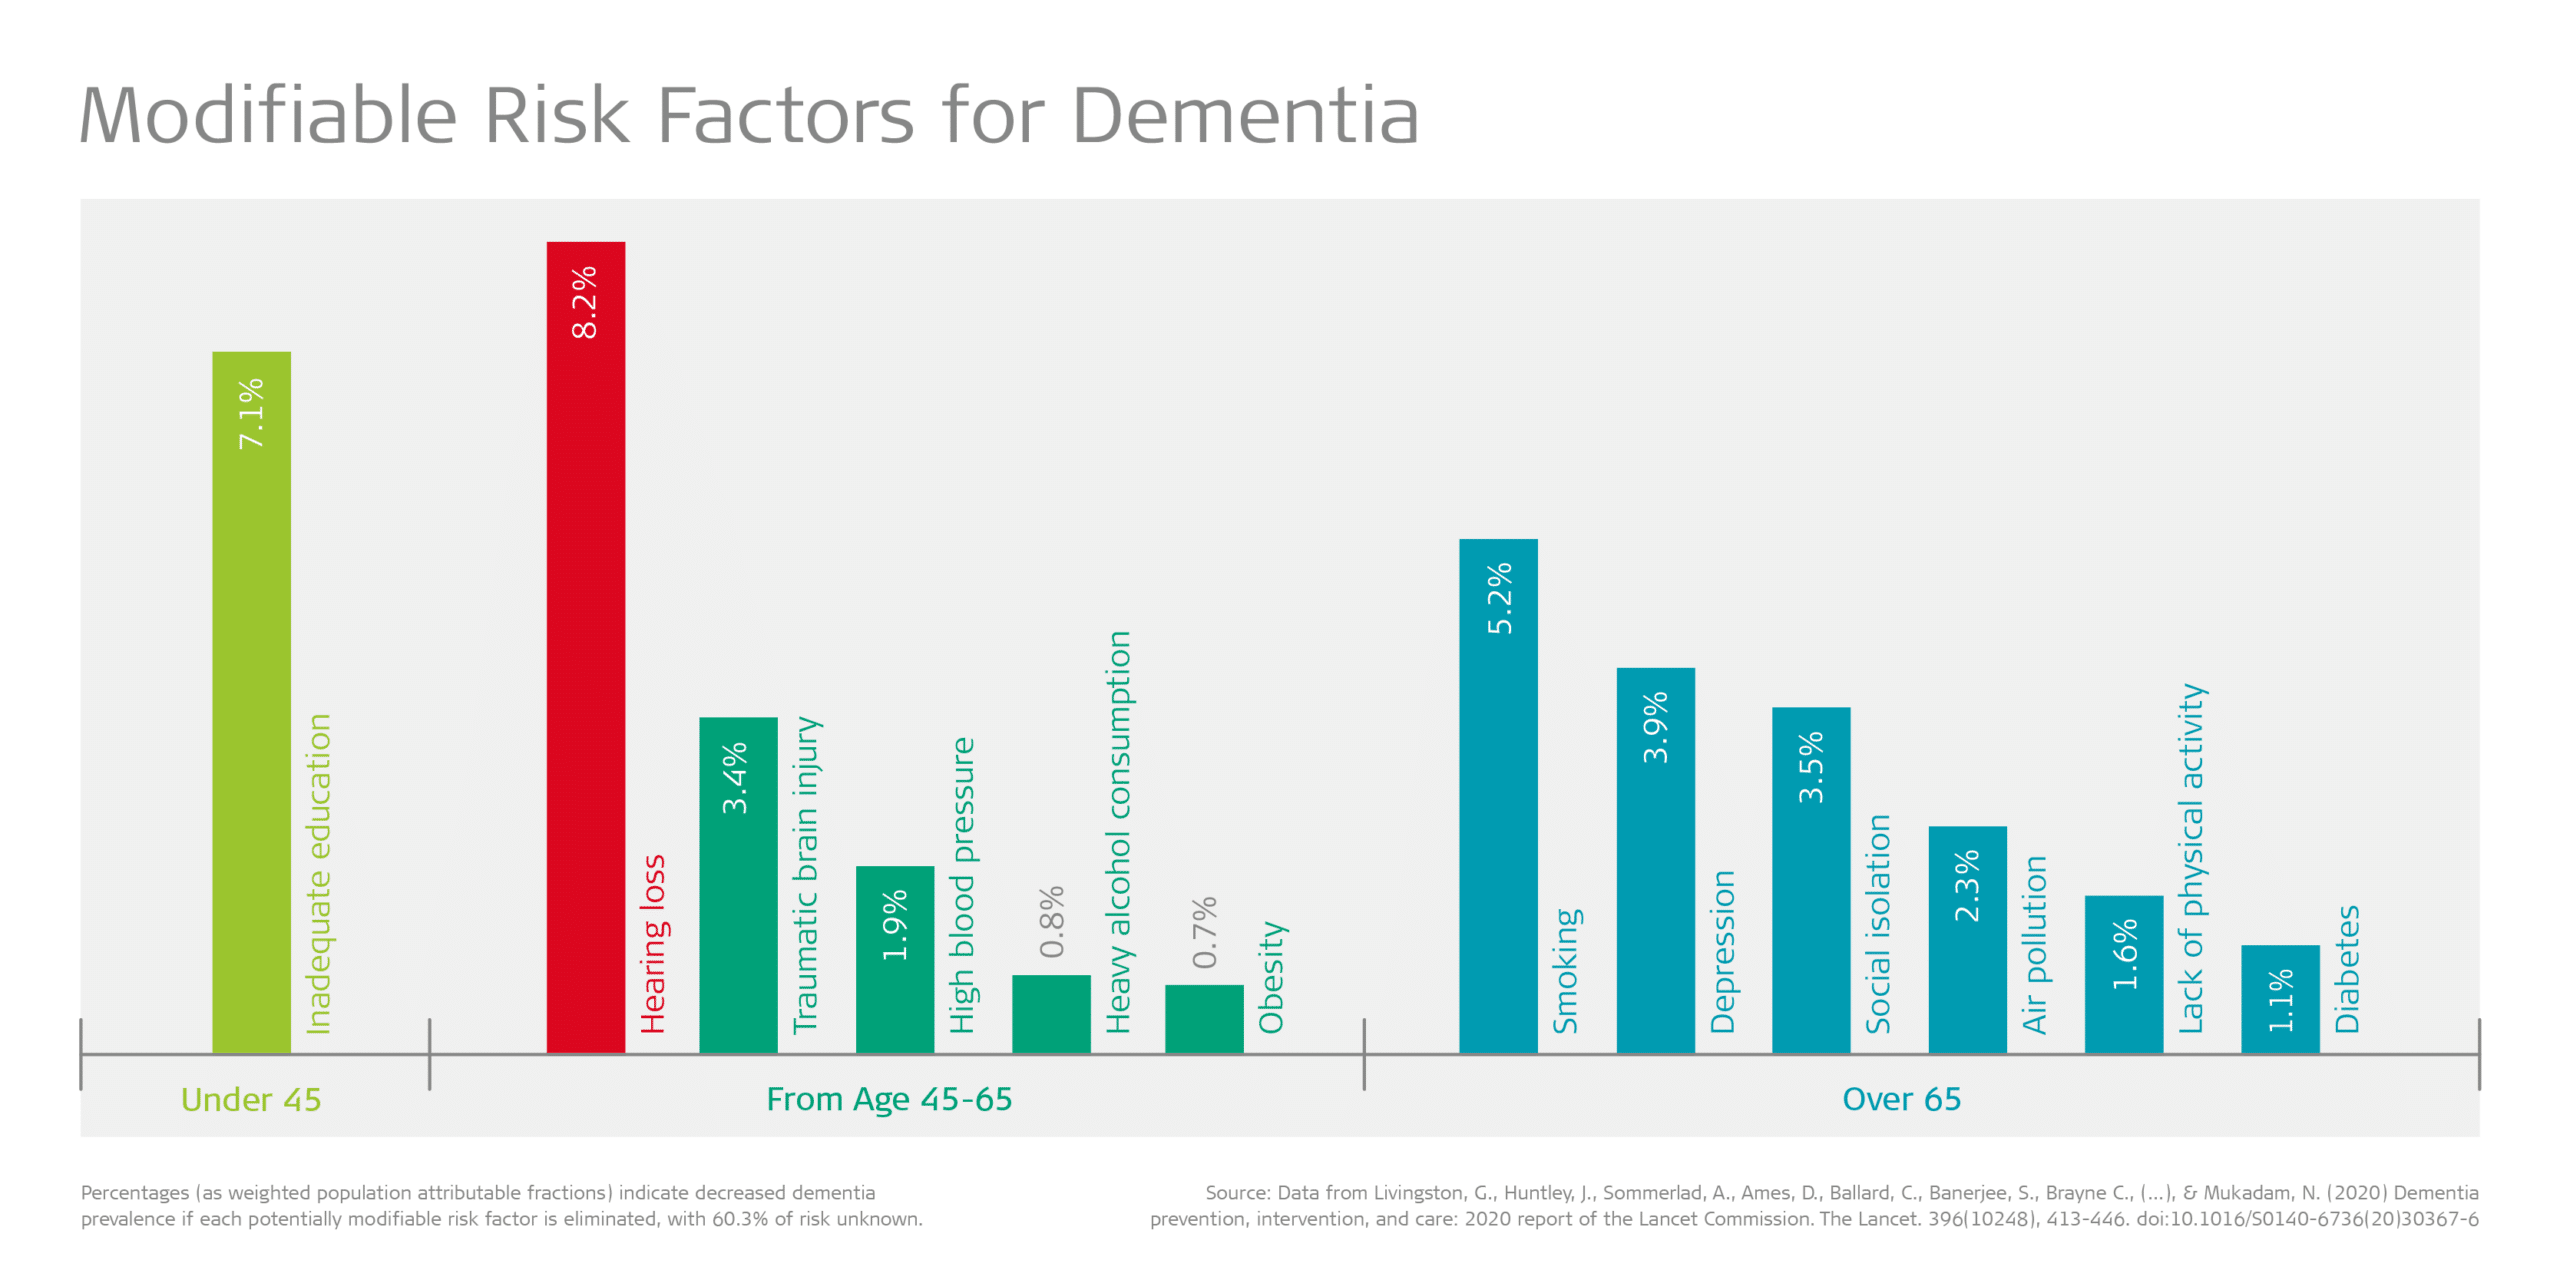 Hearing Loss is the number one modifiable risk factor for dementia